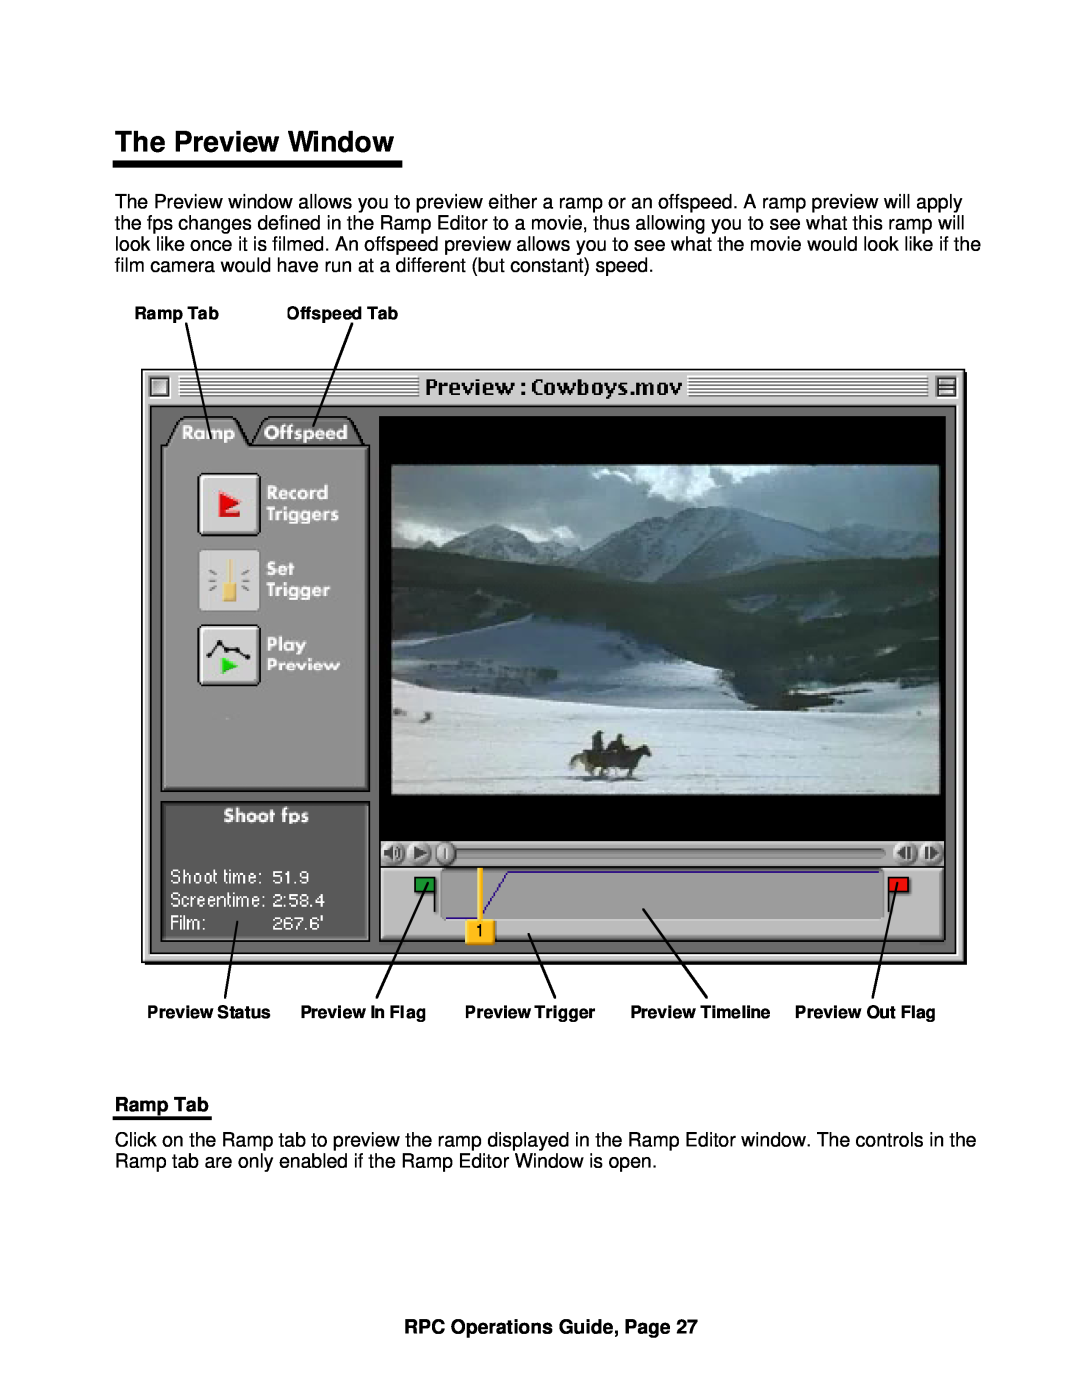 ARRI ARRI Ramp Preview Controller manual The Preview Window, Ramp Tab, RPC Operations Guide, Page 